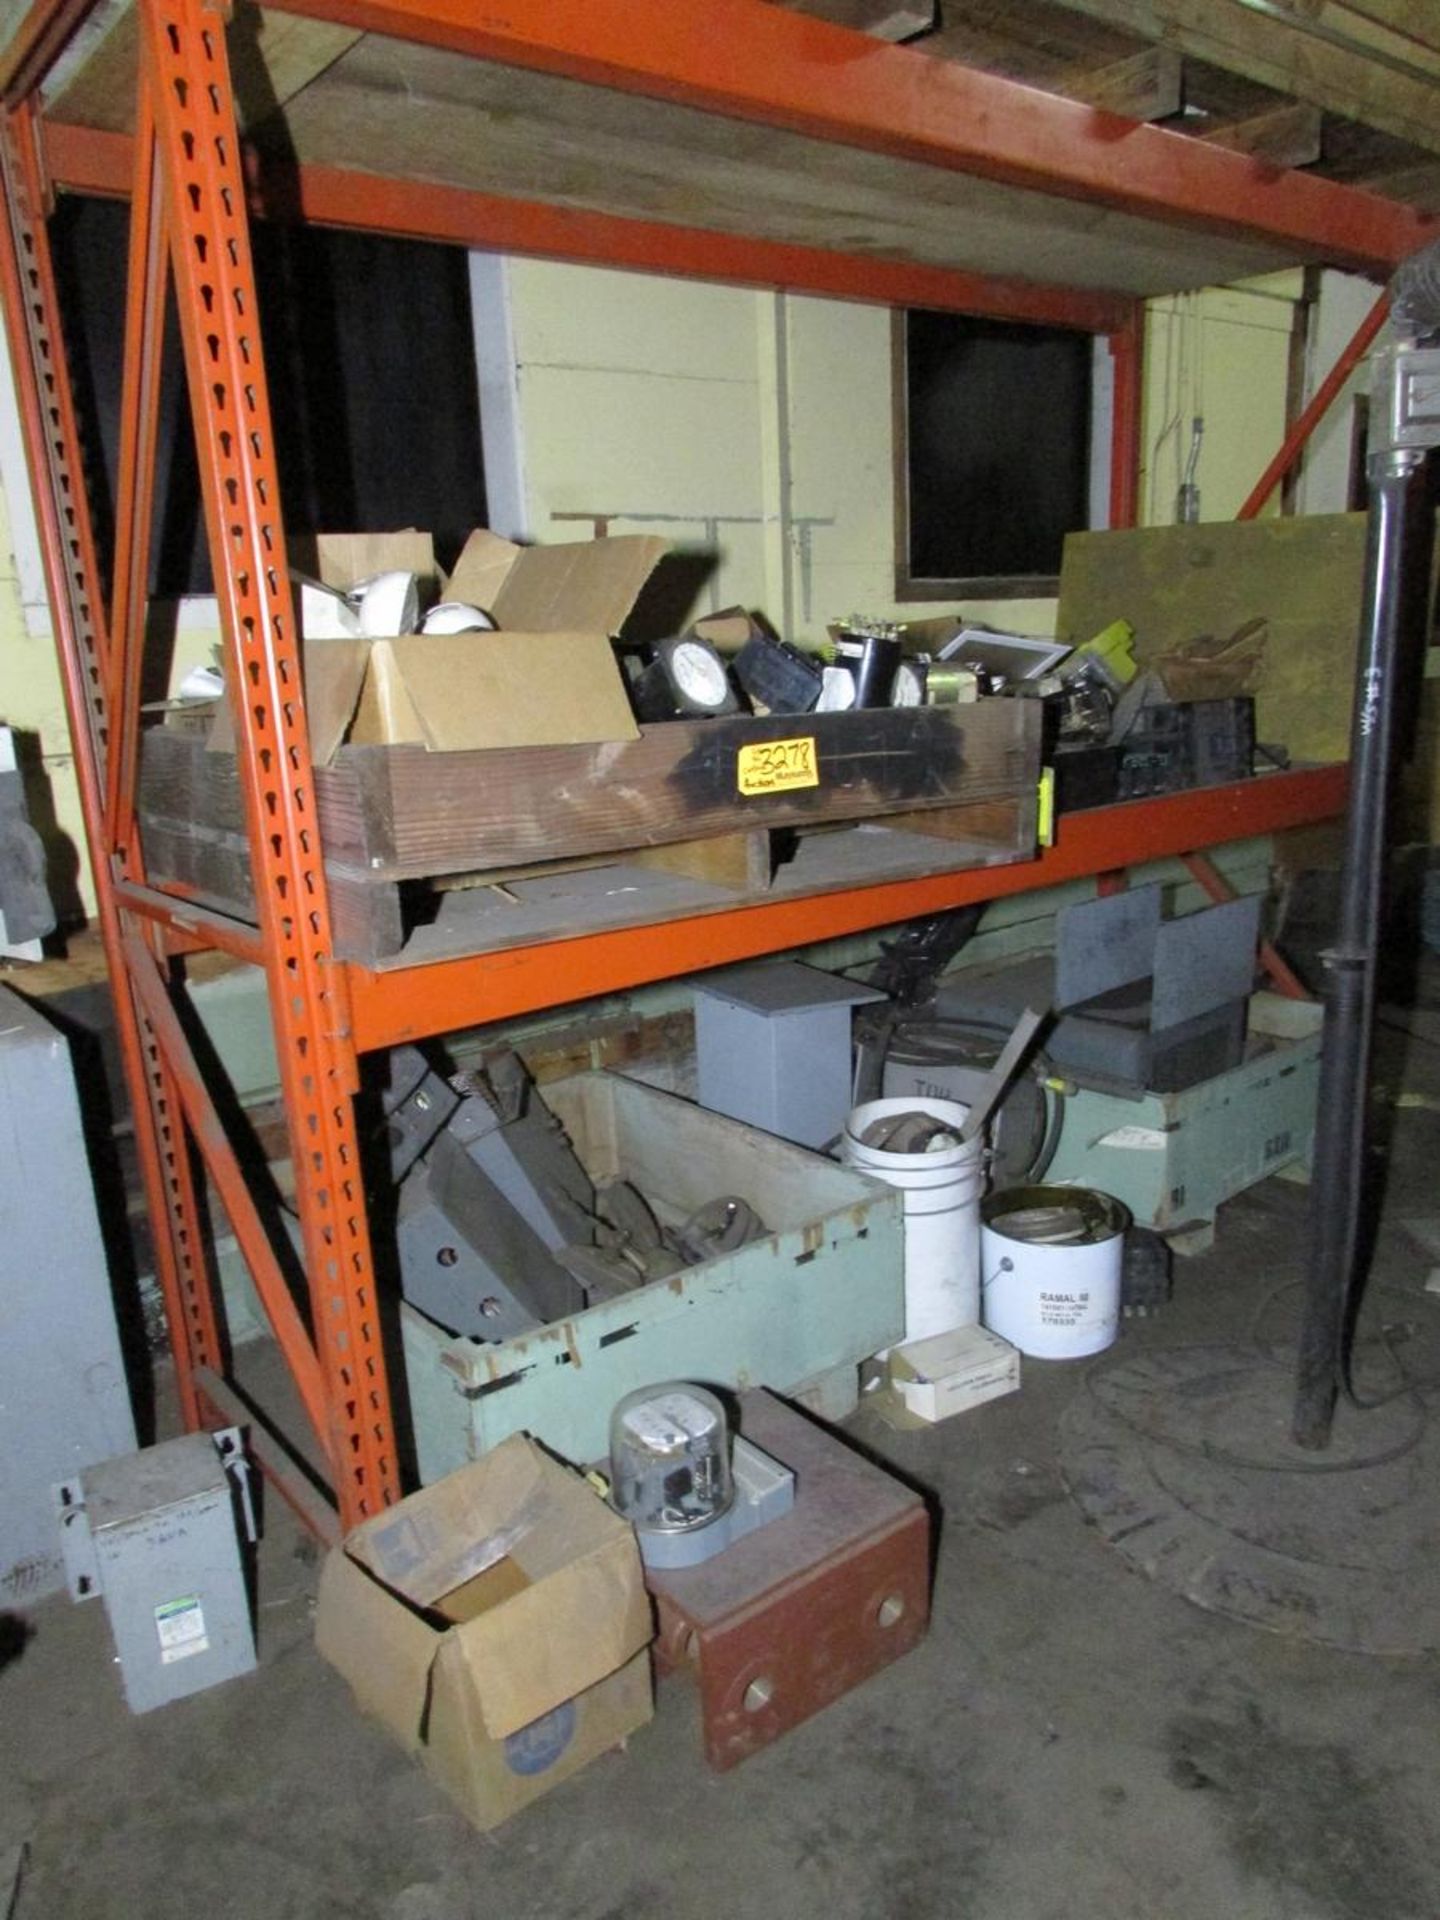 Remaining Contents of Storage Room - Image 8 of 27